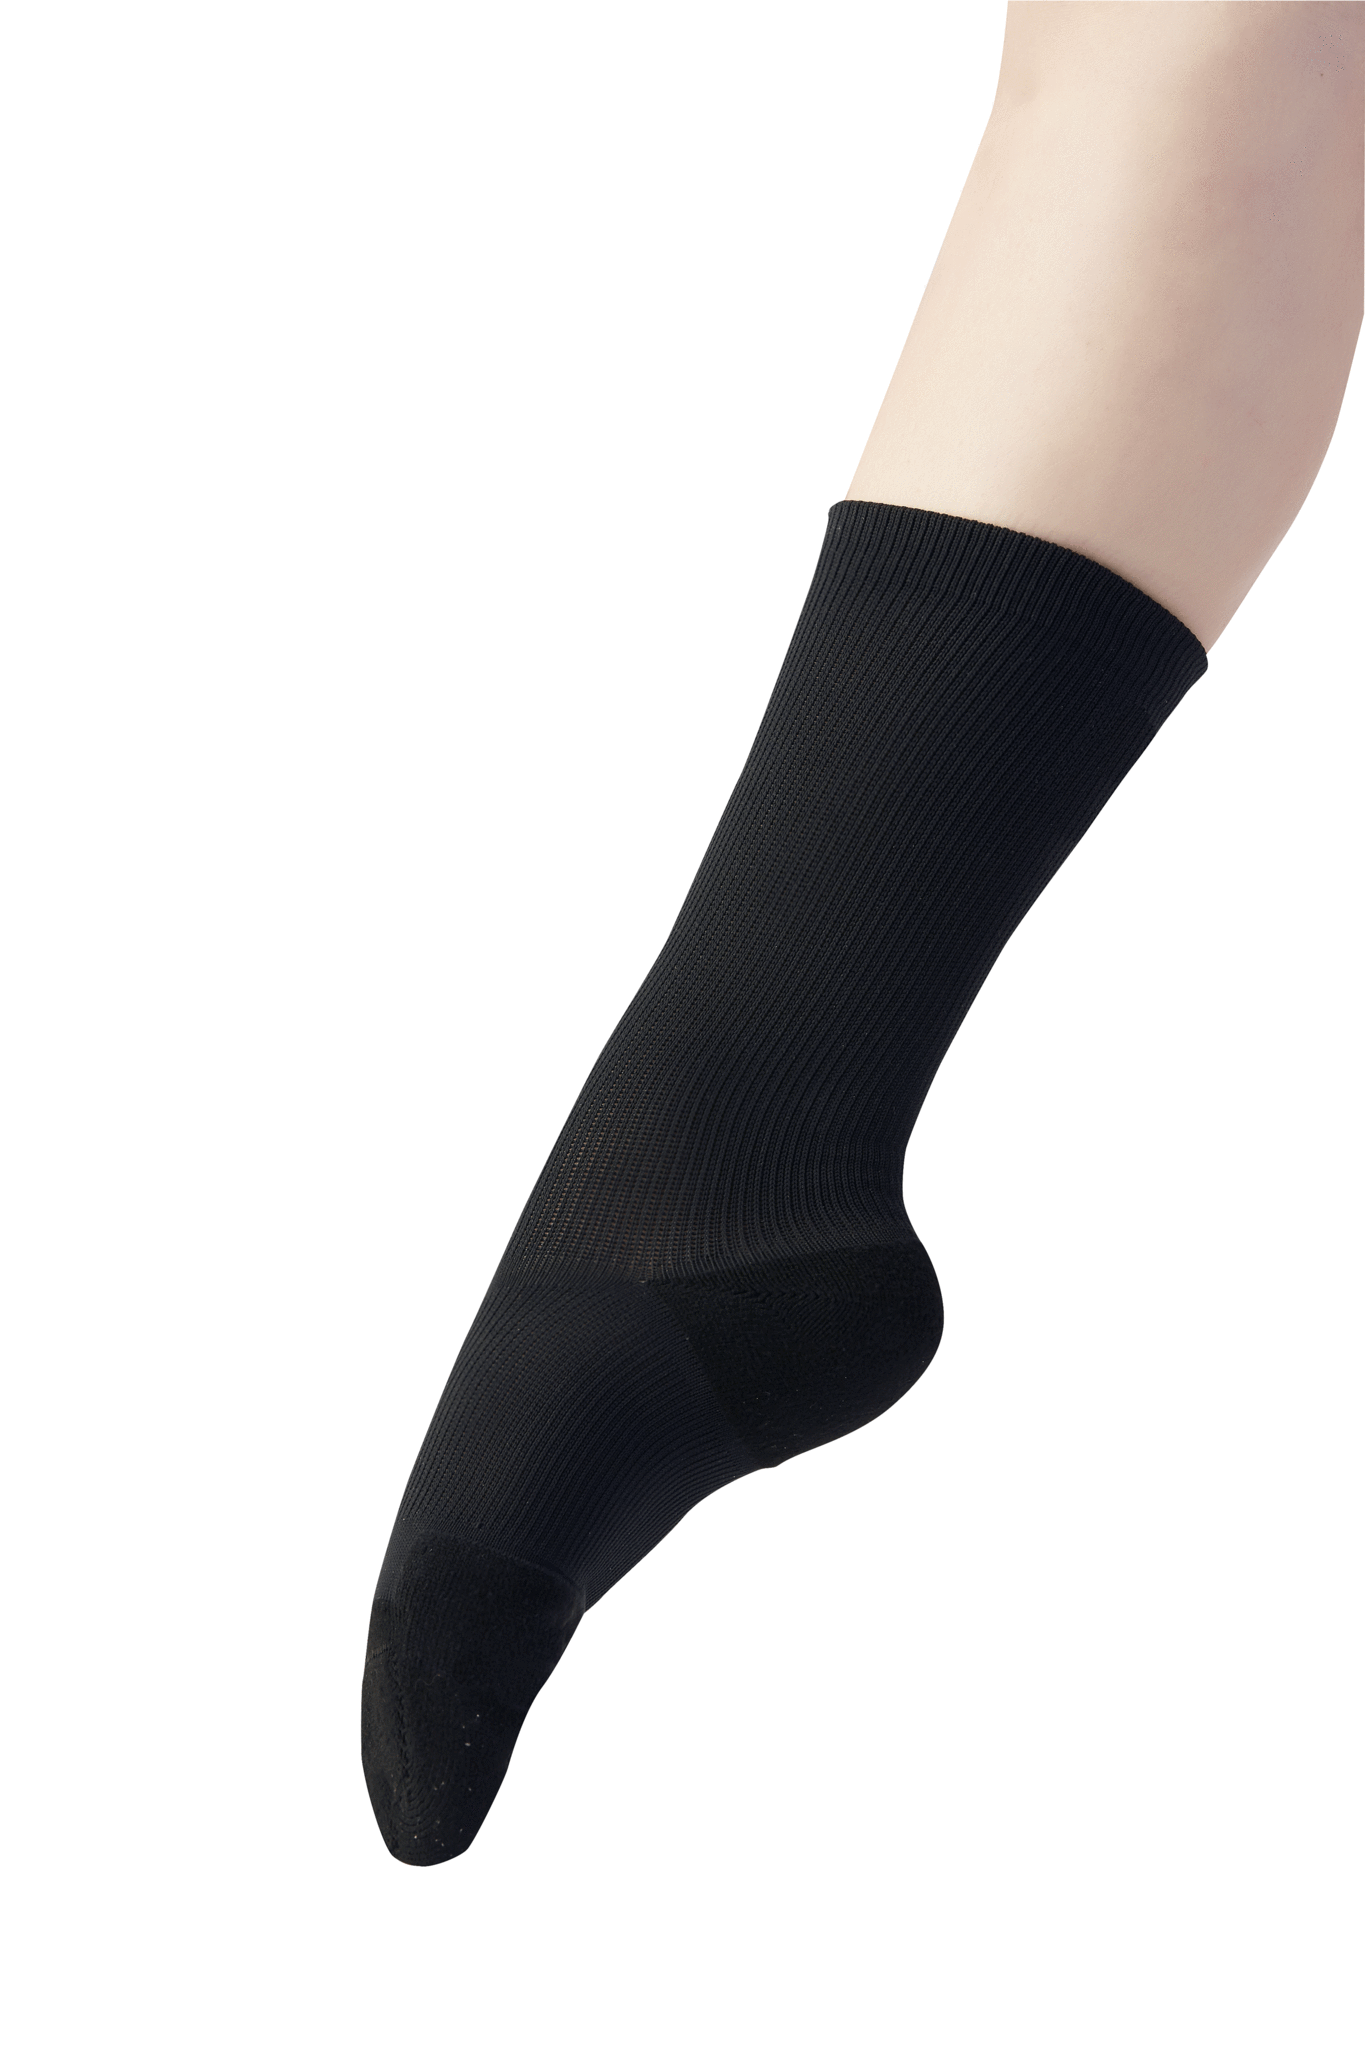 Apolla Shocks Infinite with Traction Dance Sock - Womens/Mens